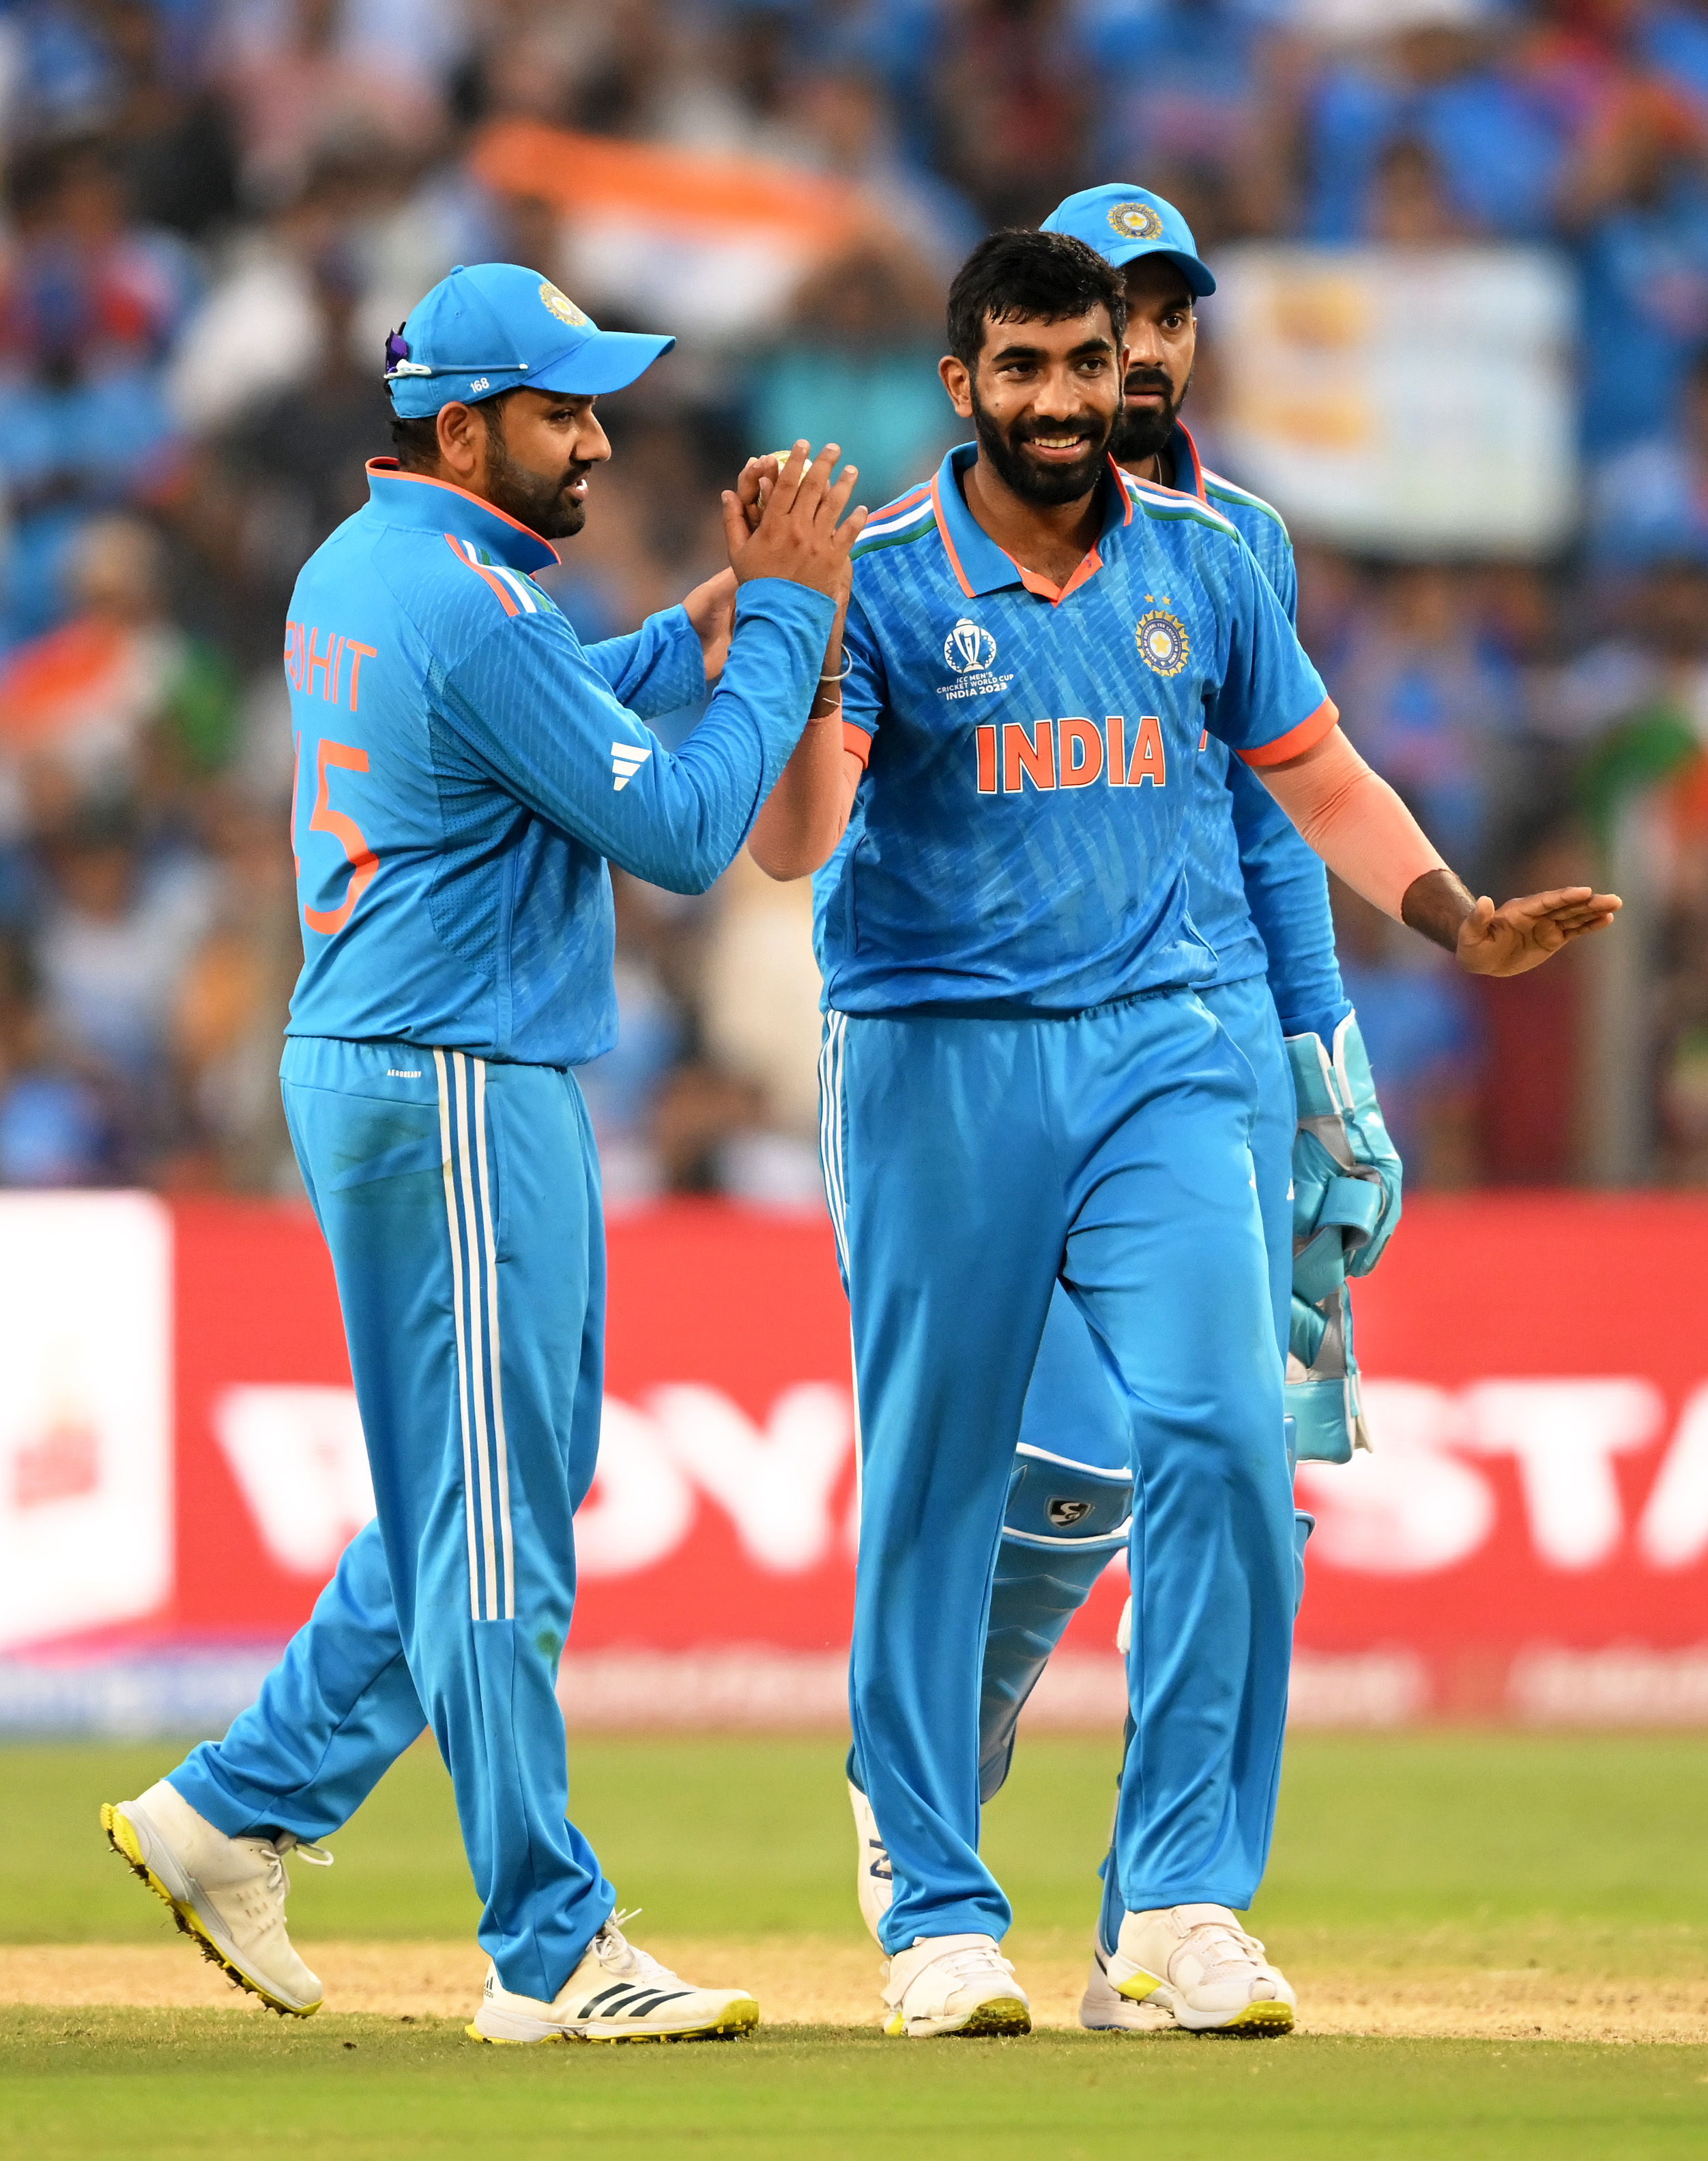 IND VS NZ | Twitter applauds Bumrah's indication missing stumps in mid of India's review dilemma